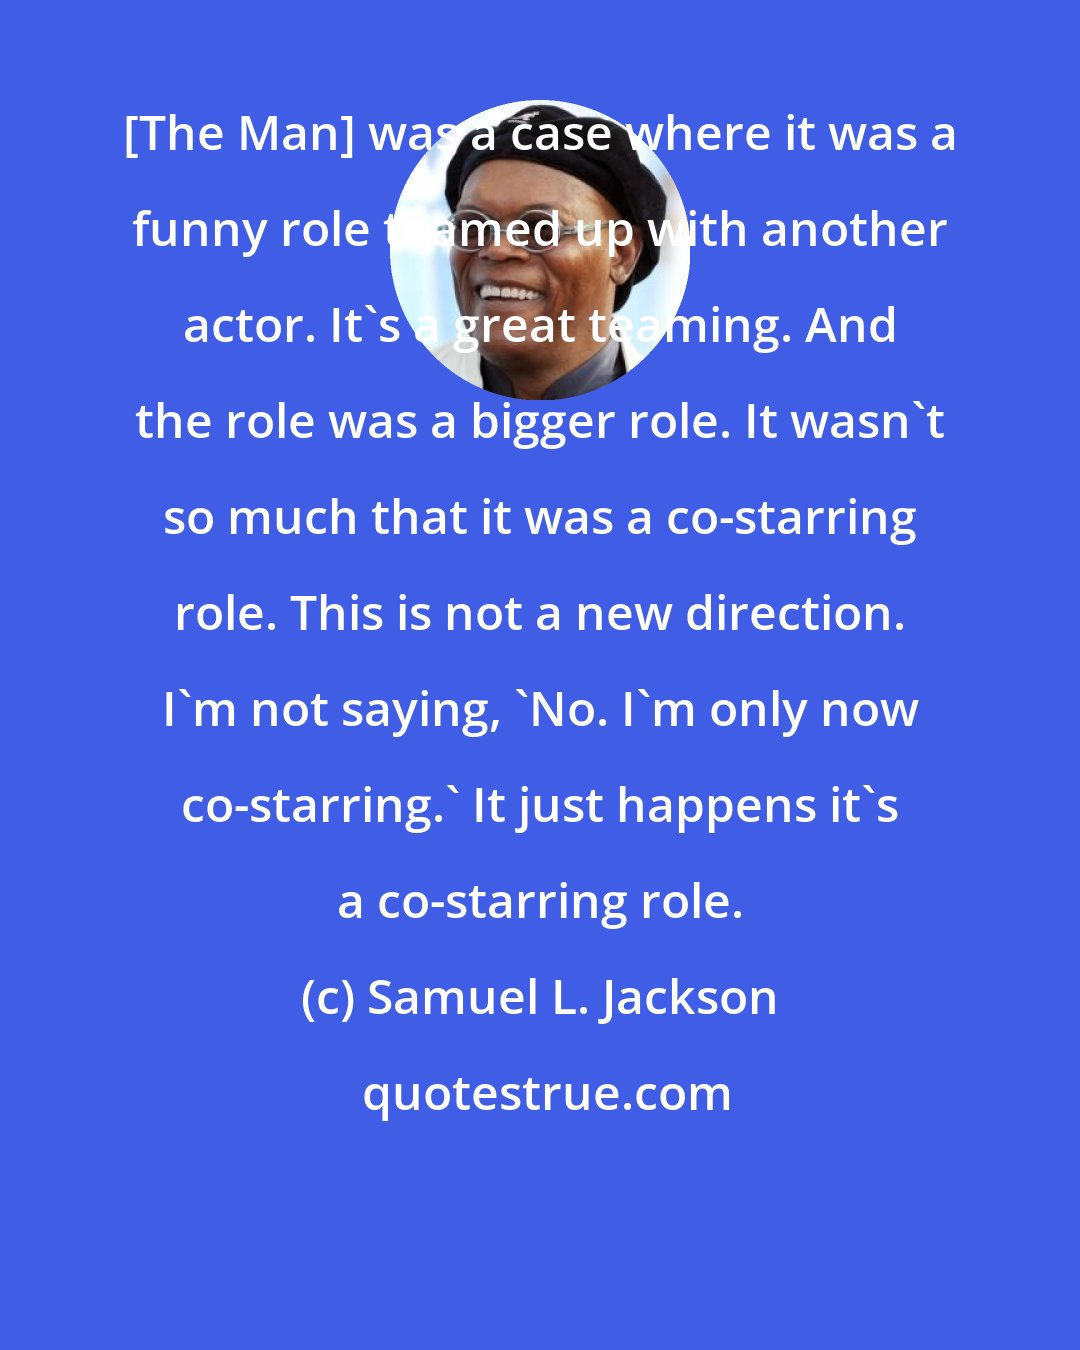 Samuel L. Jackson: [The Man] was a case where it was a funny role teamed up with another actor. It's a great teaming. And the role was a bigger role. It wasn't so much that it was a co-starring role. This is not a new direction. I'm not saying, 'No. I'm only now co-starring.' It just happens it's a co-starring role.